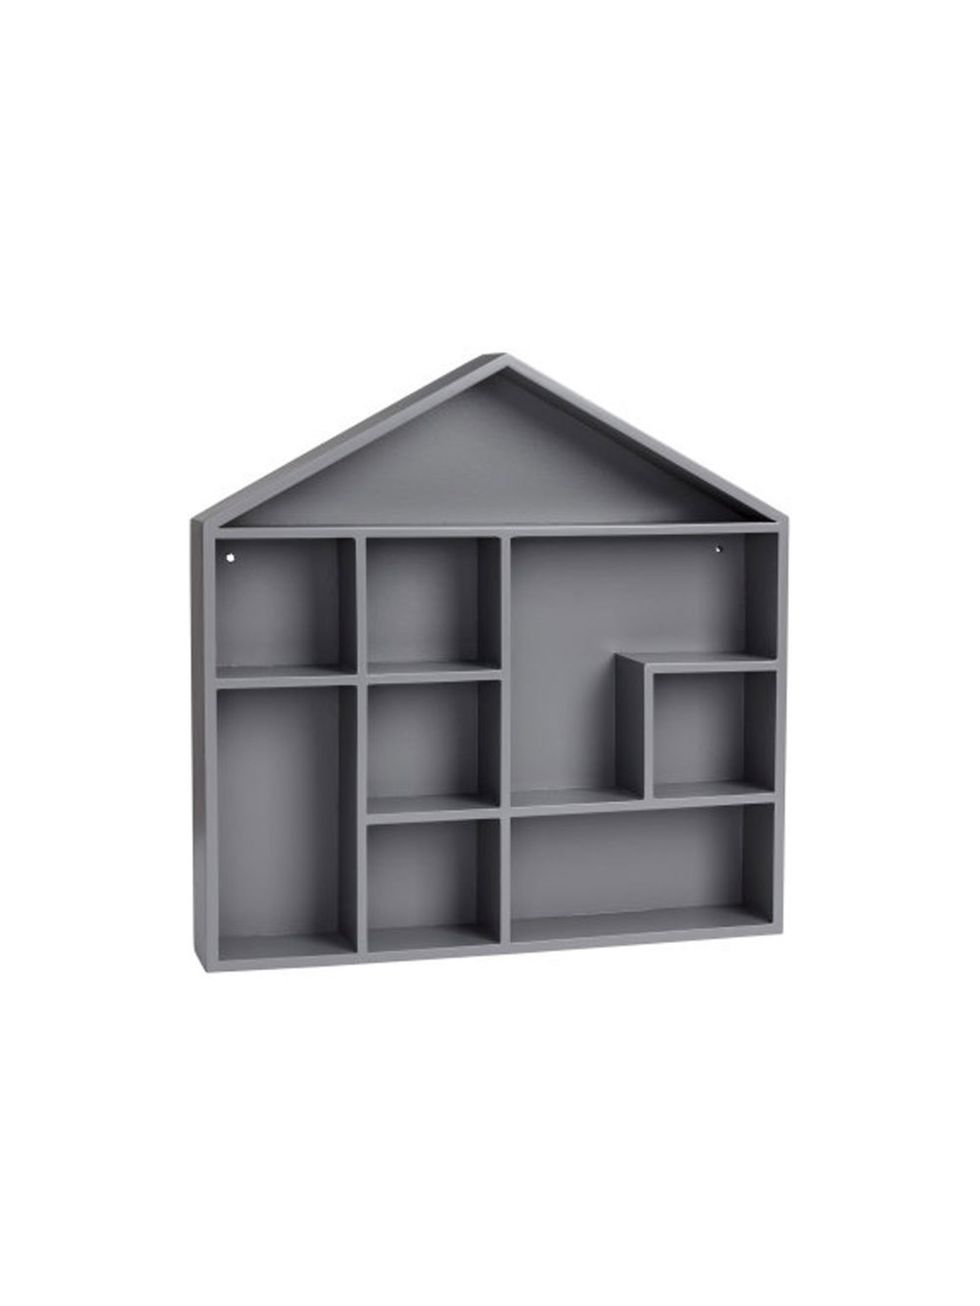 Line, Rectangle, Grey, Parallel, Square, Cabinetry, Silver, Plywood, Shelving, 